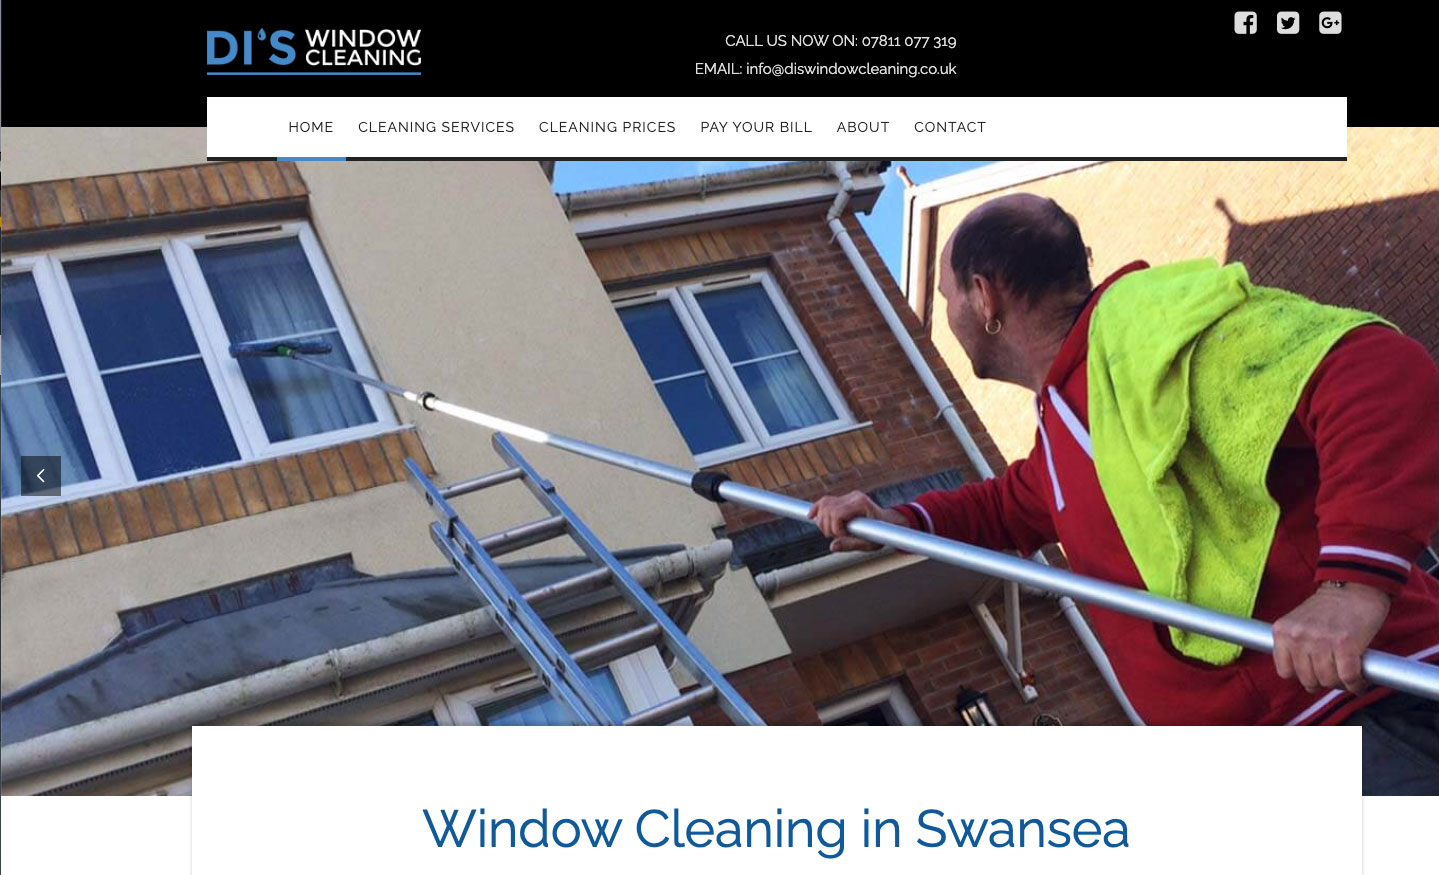 Dis window cleaning services